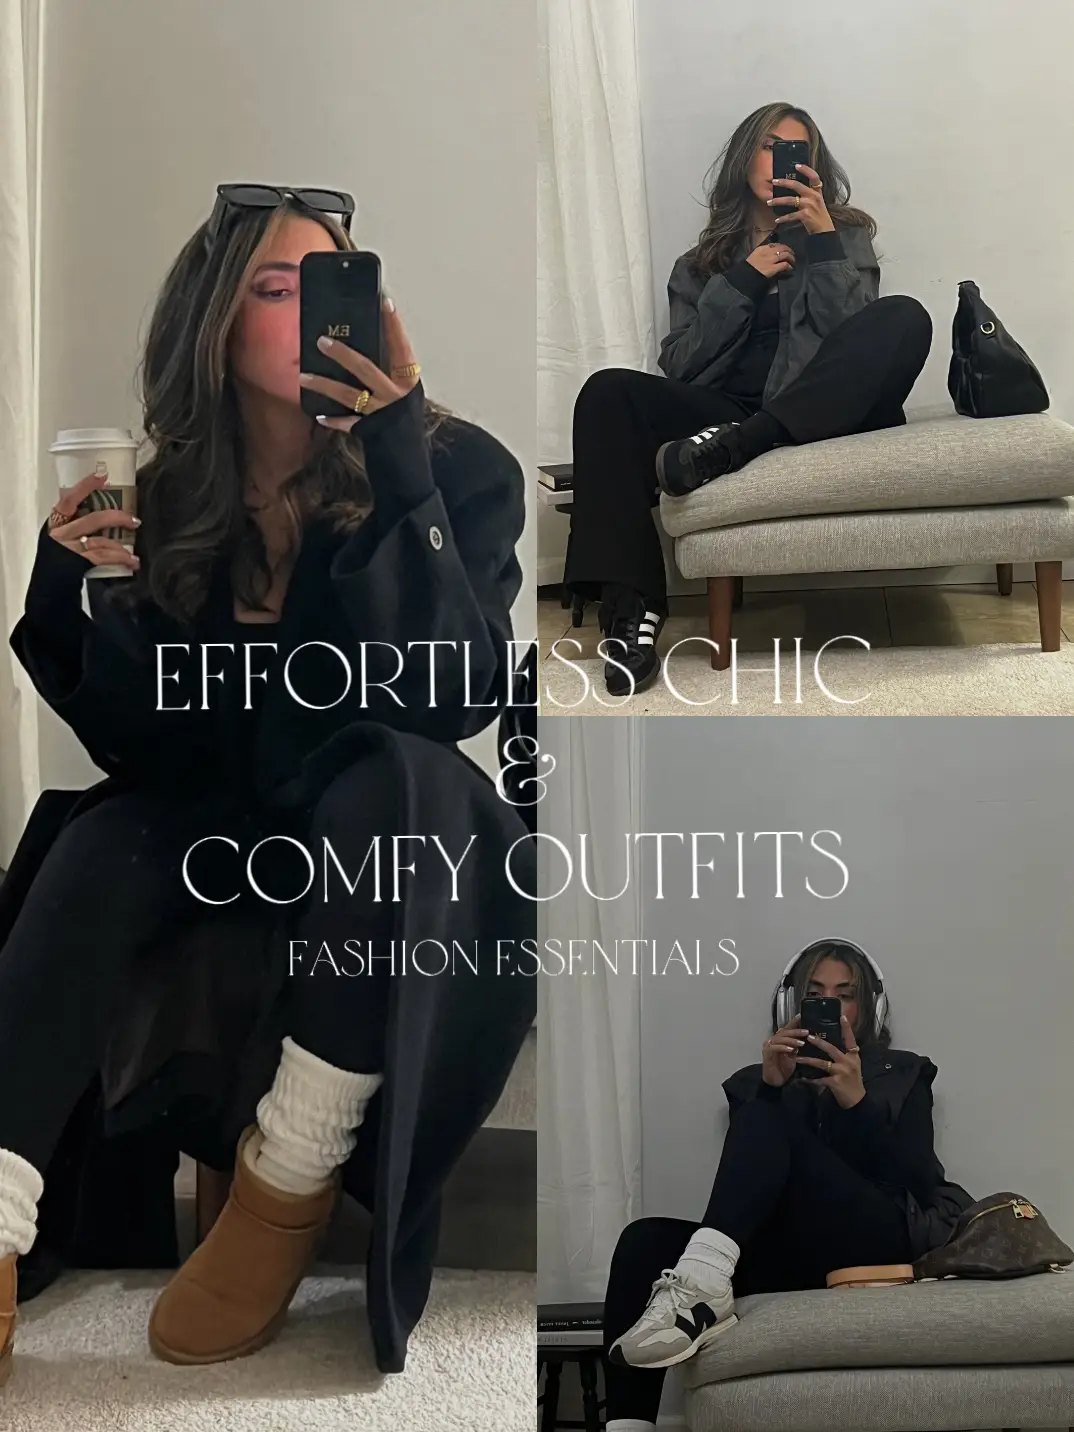 EFFORTLESS AND COMFY OUTFITS, Fashion Essentials, Gallery posted by Teffy  Mesa UGC